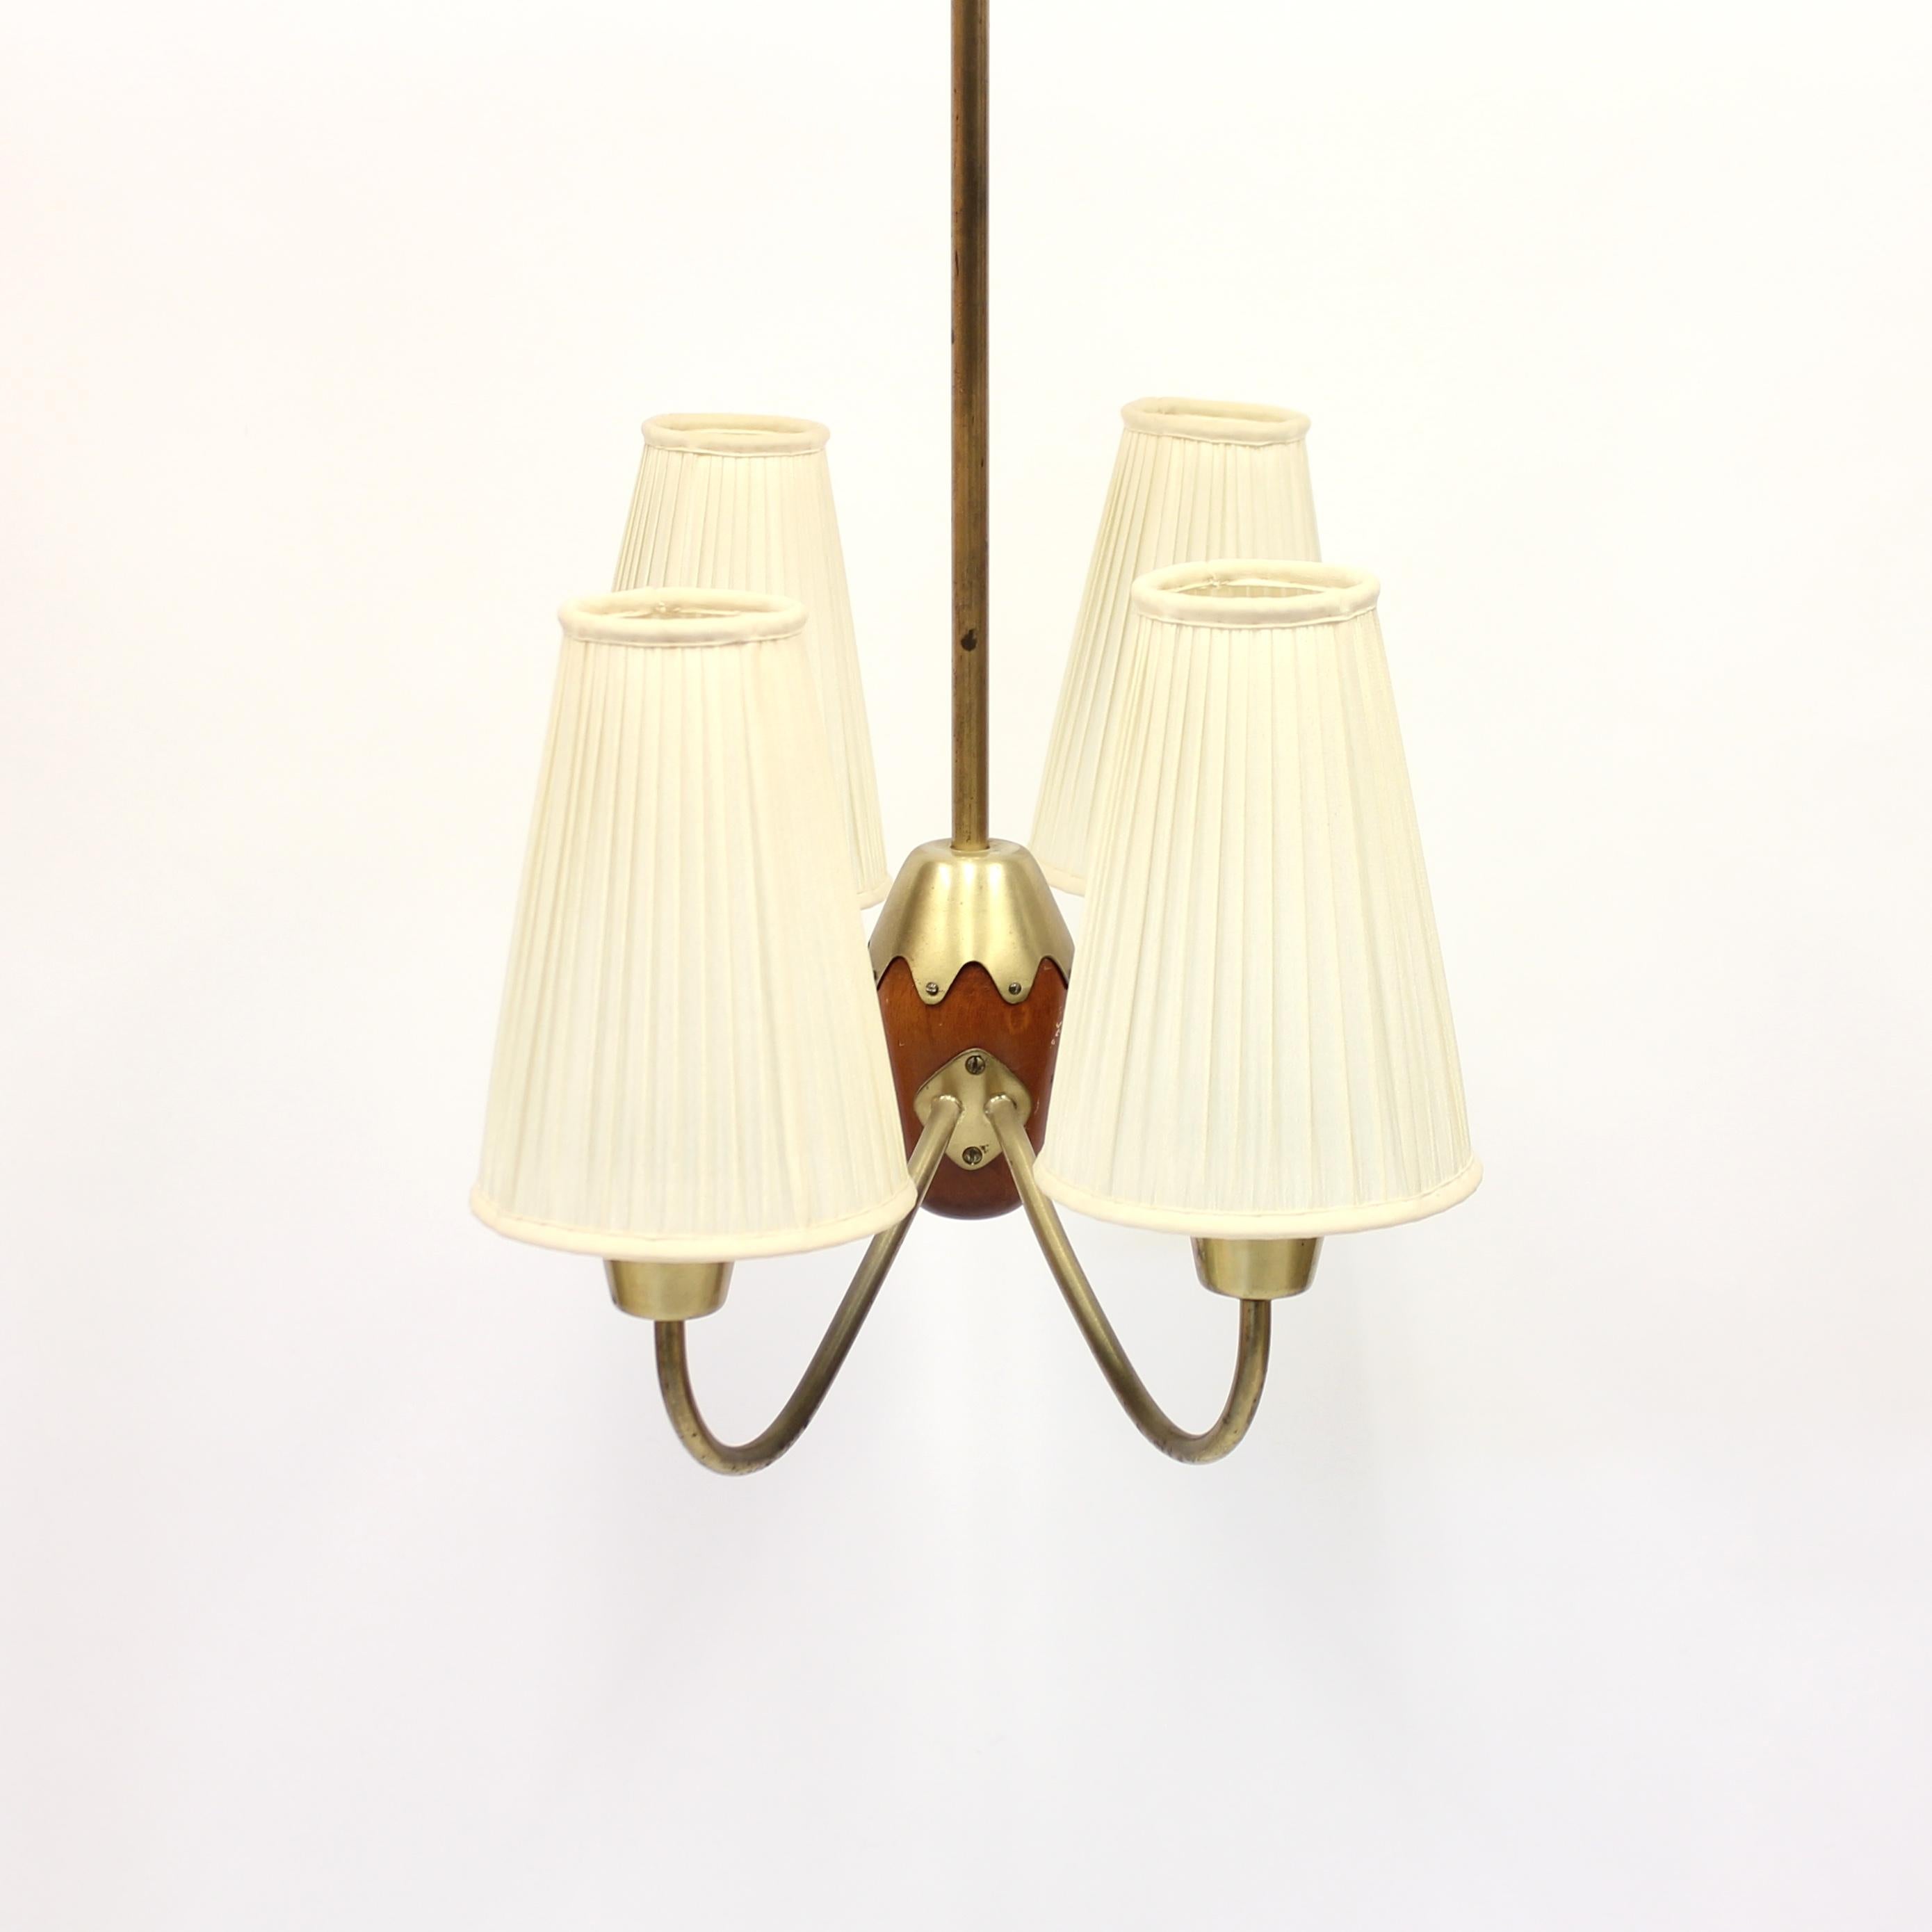 4-Light Ceiling Lamp, Attributed to ASEA, 1950s 3